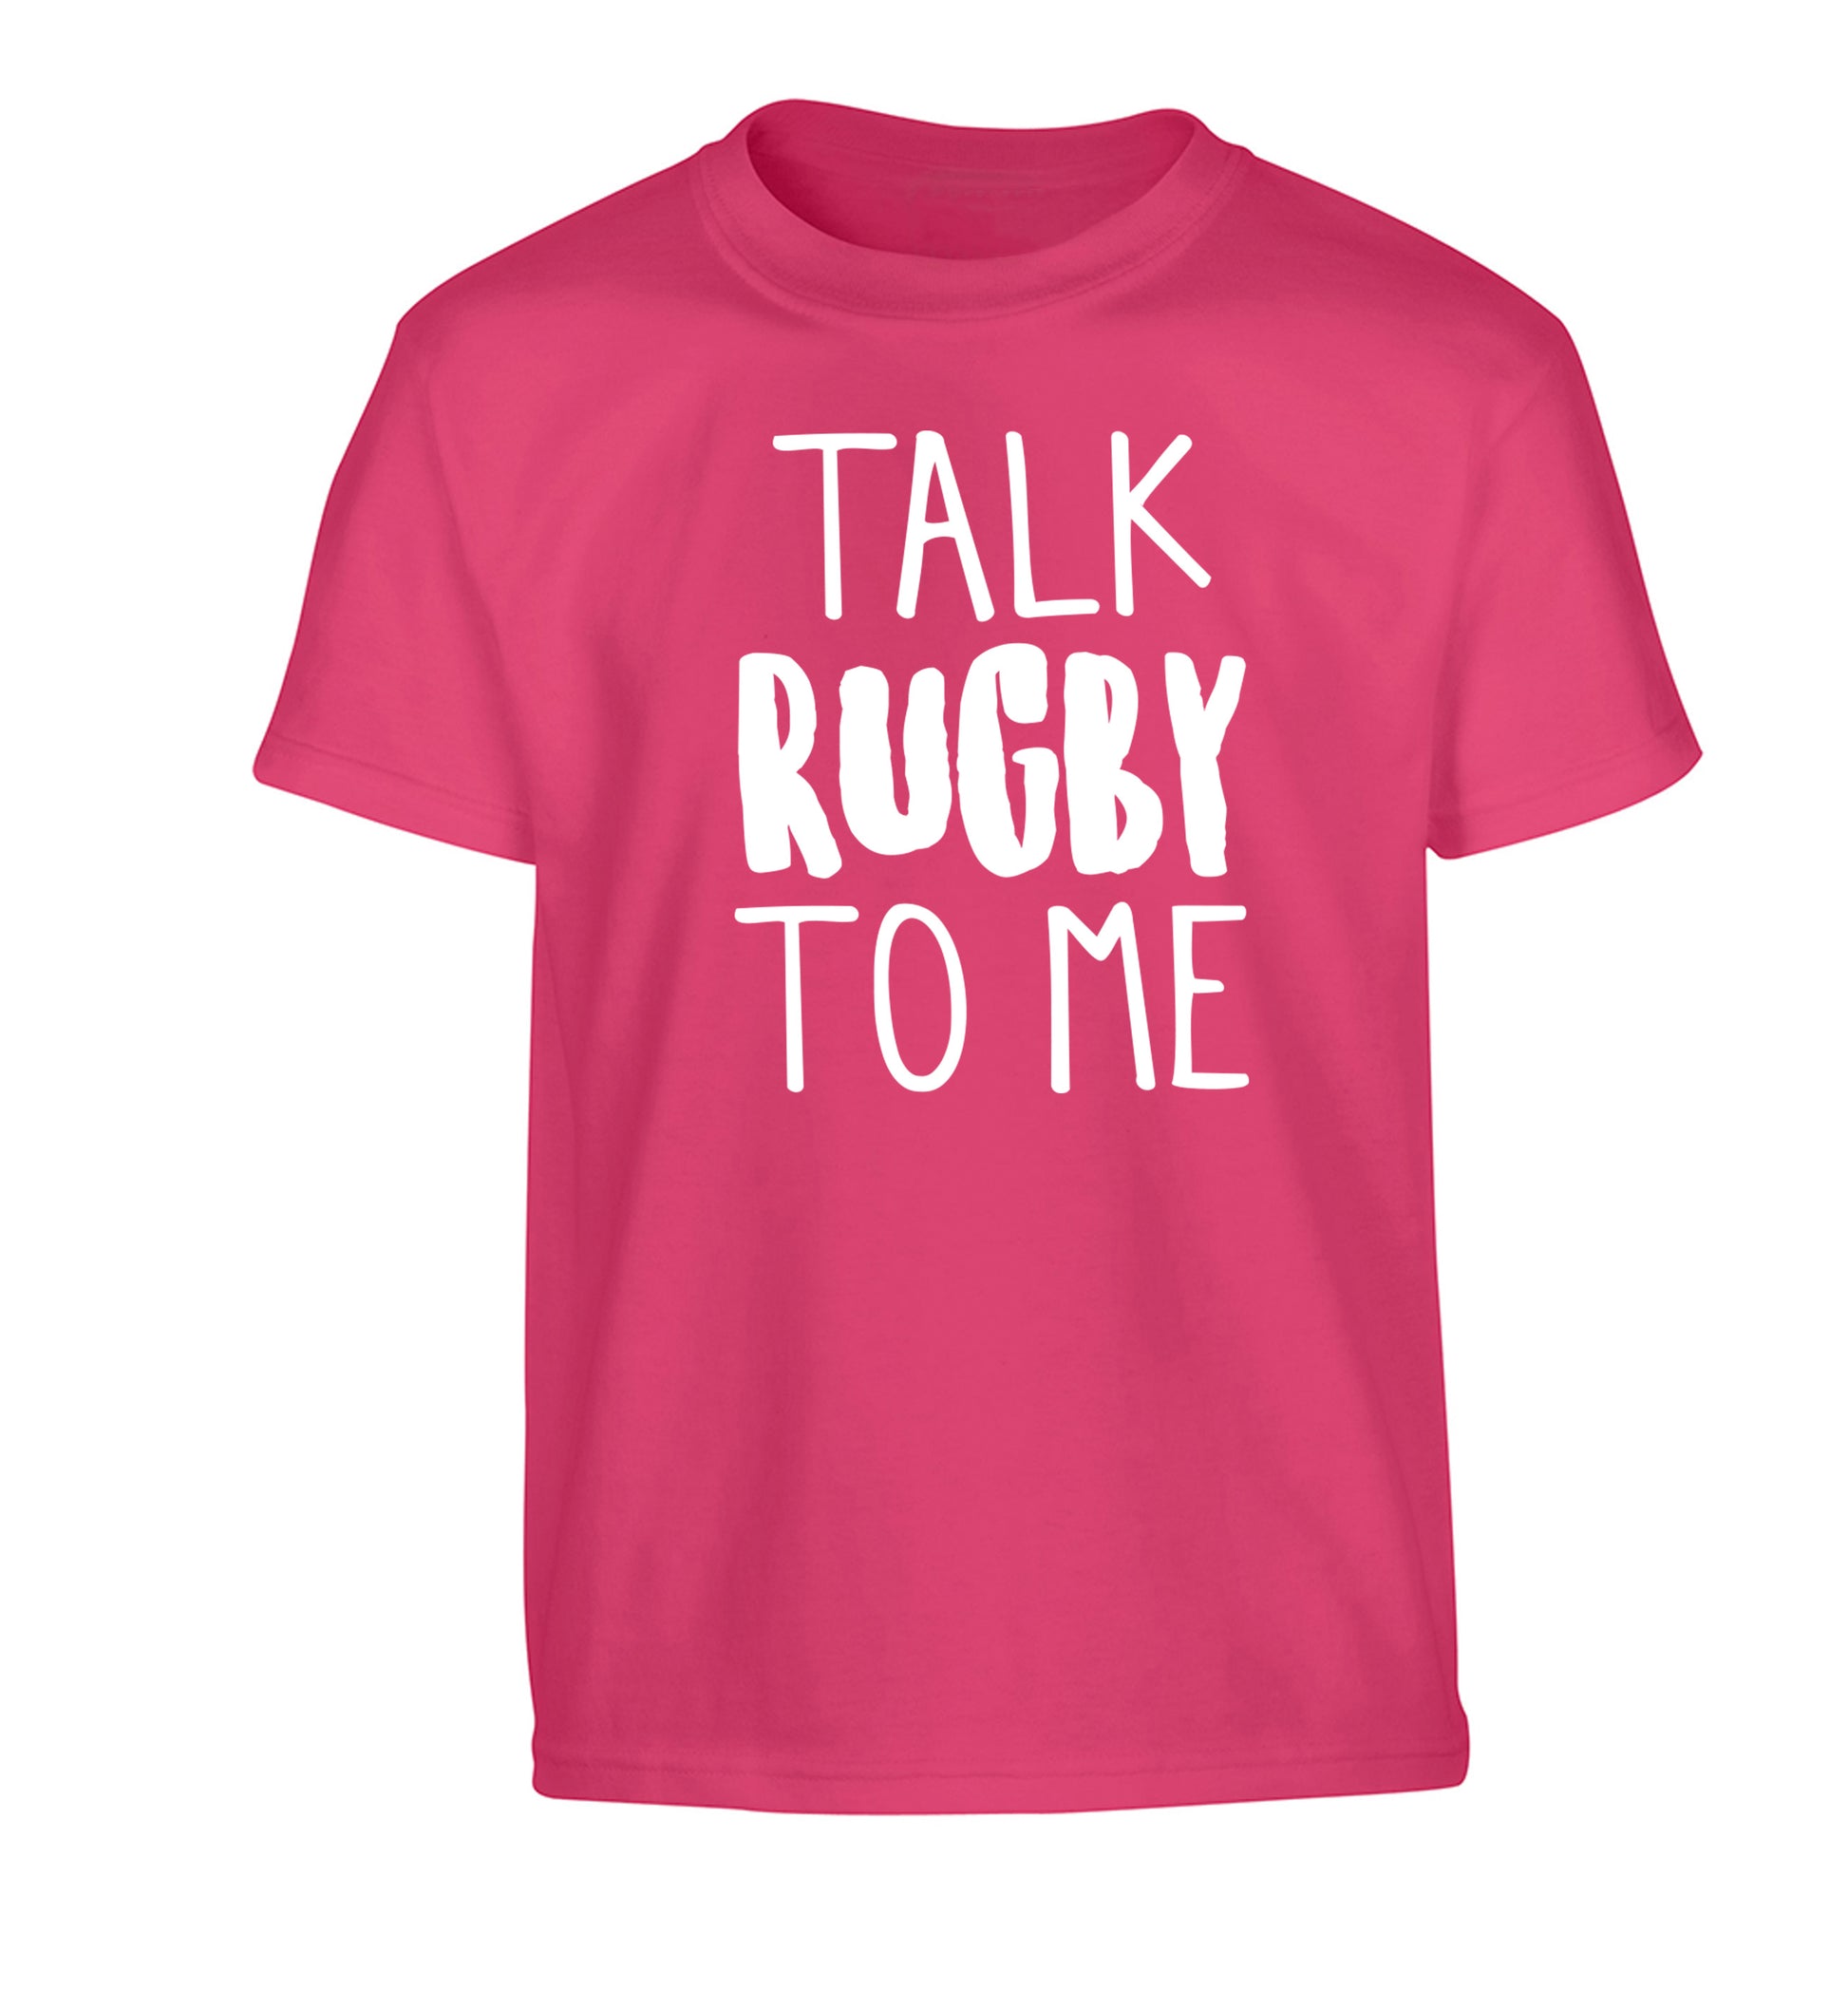 Talk rugby to me Children's pink Tshirt 12-13 Years